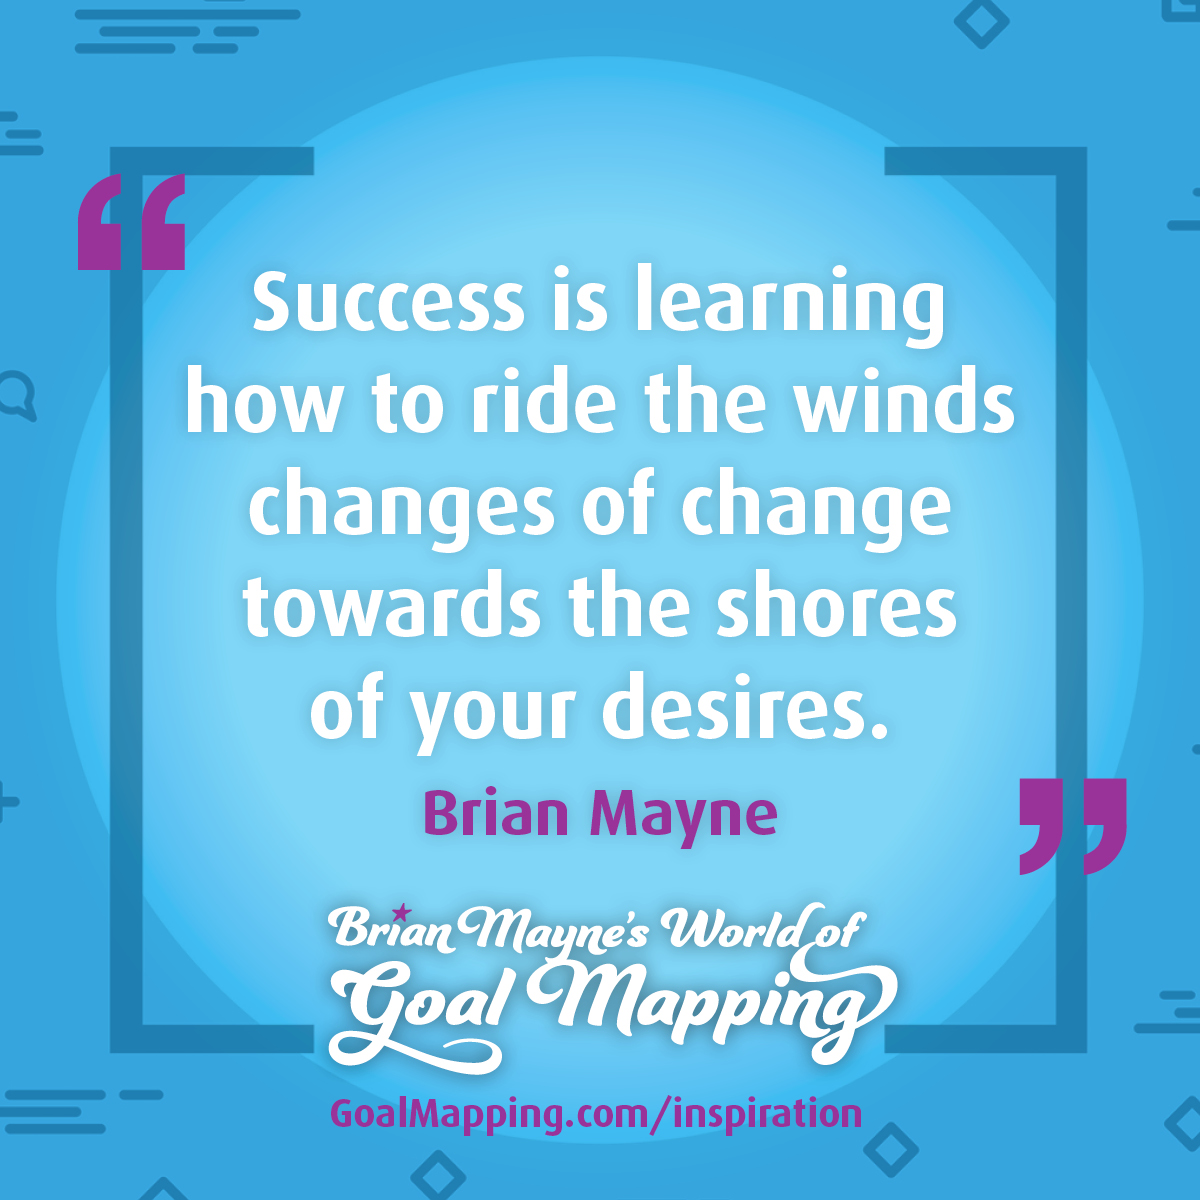 "Success is learning how to ride the winds changes of change towards the shores of your desires."  Brian Mayne